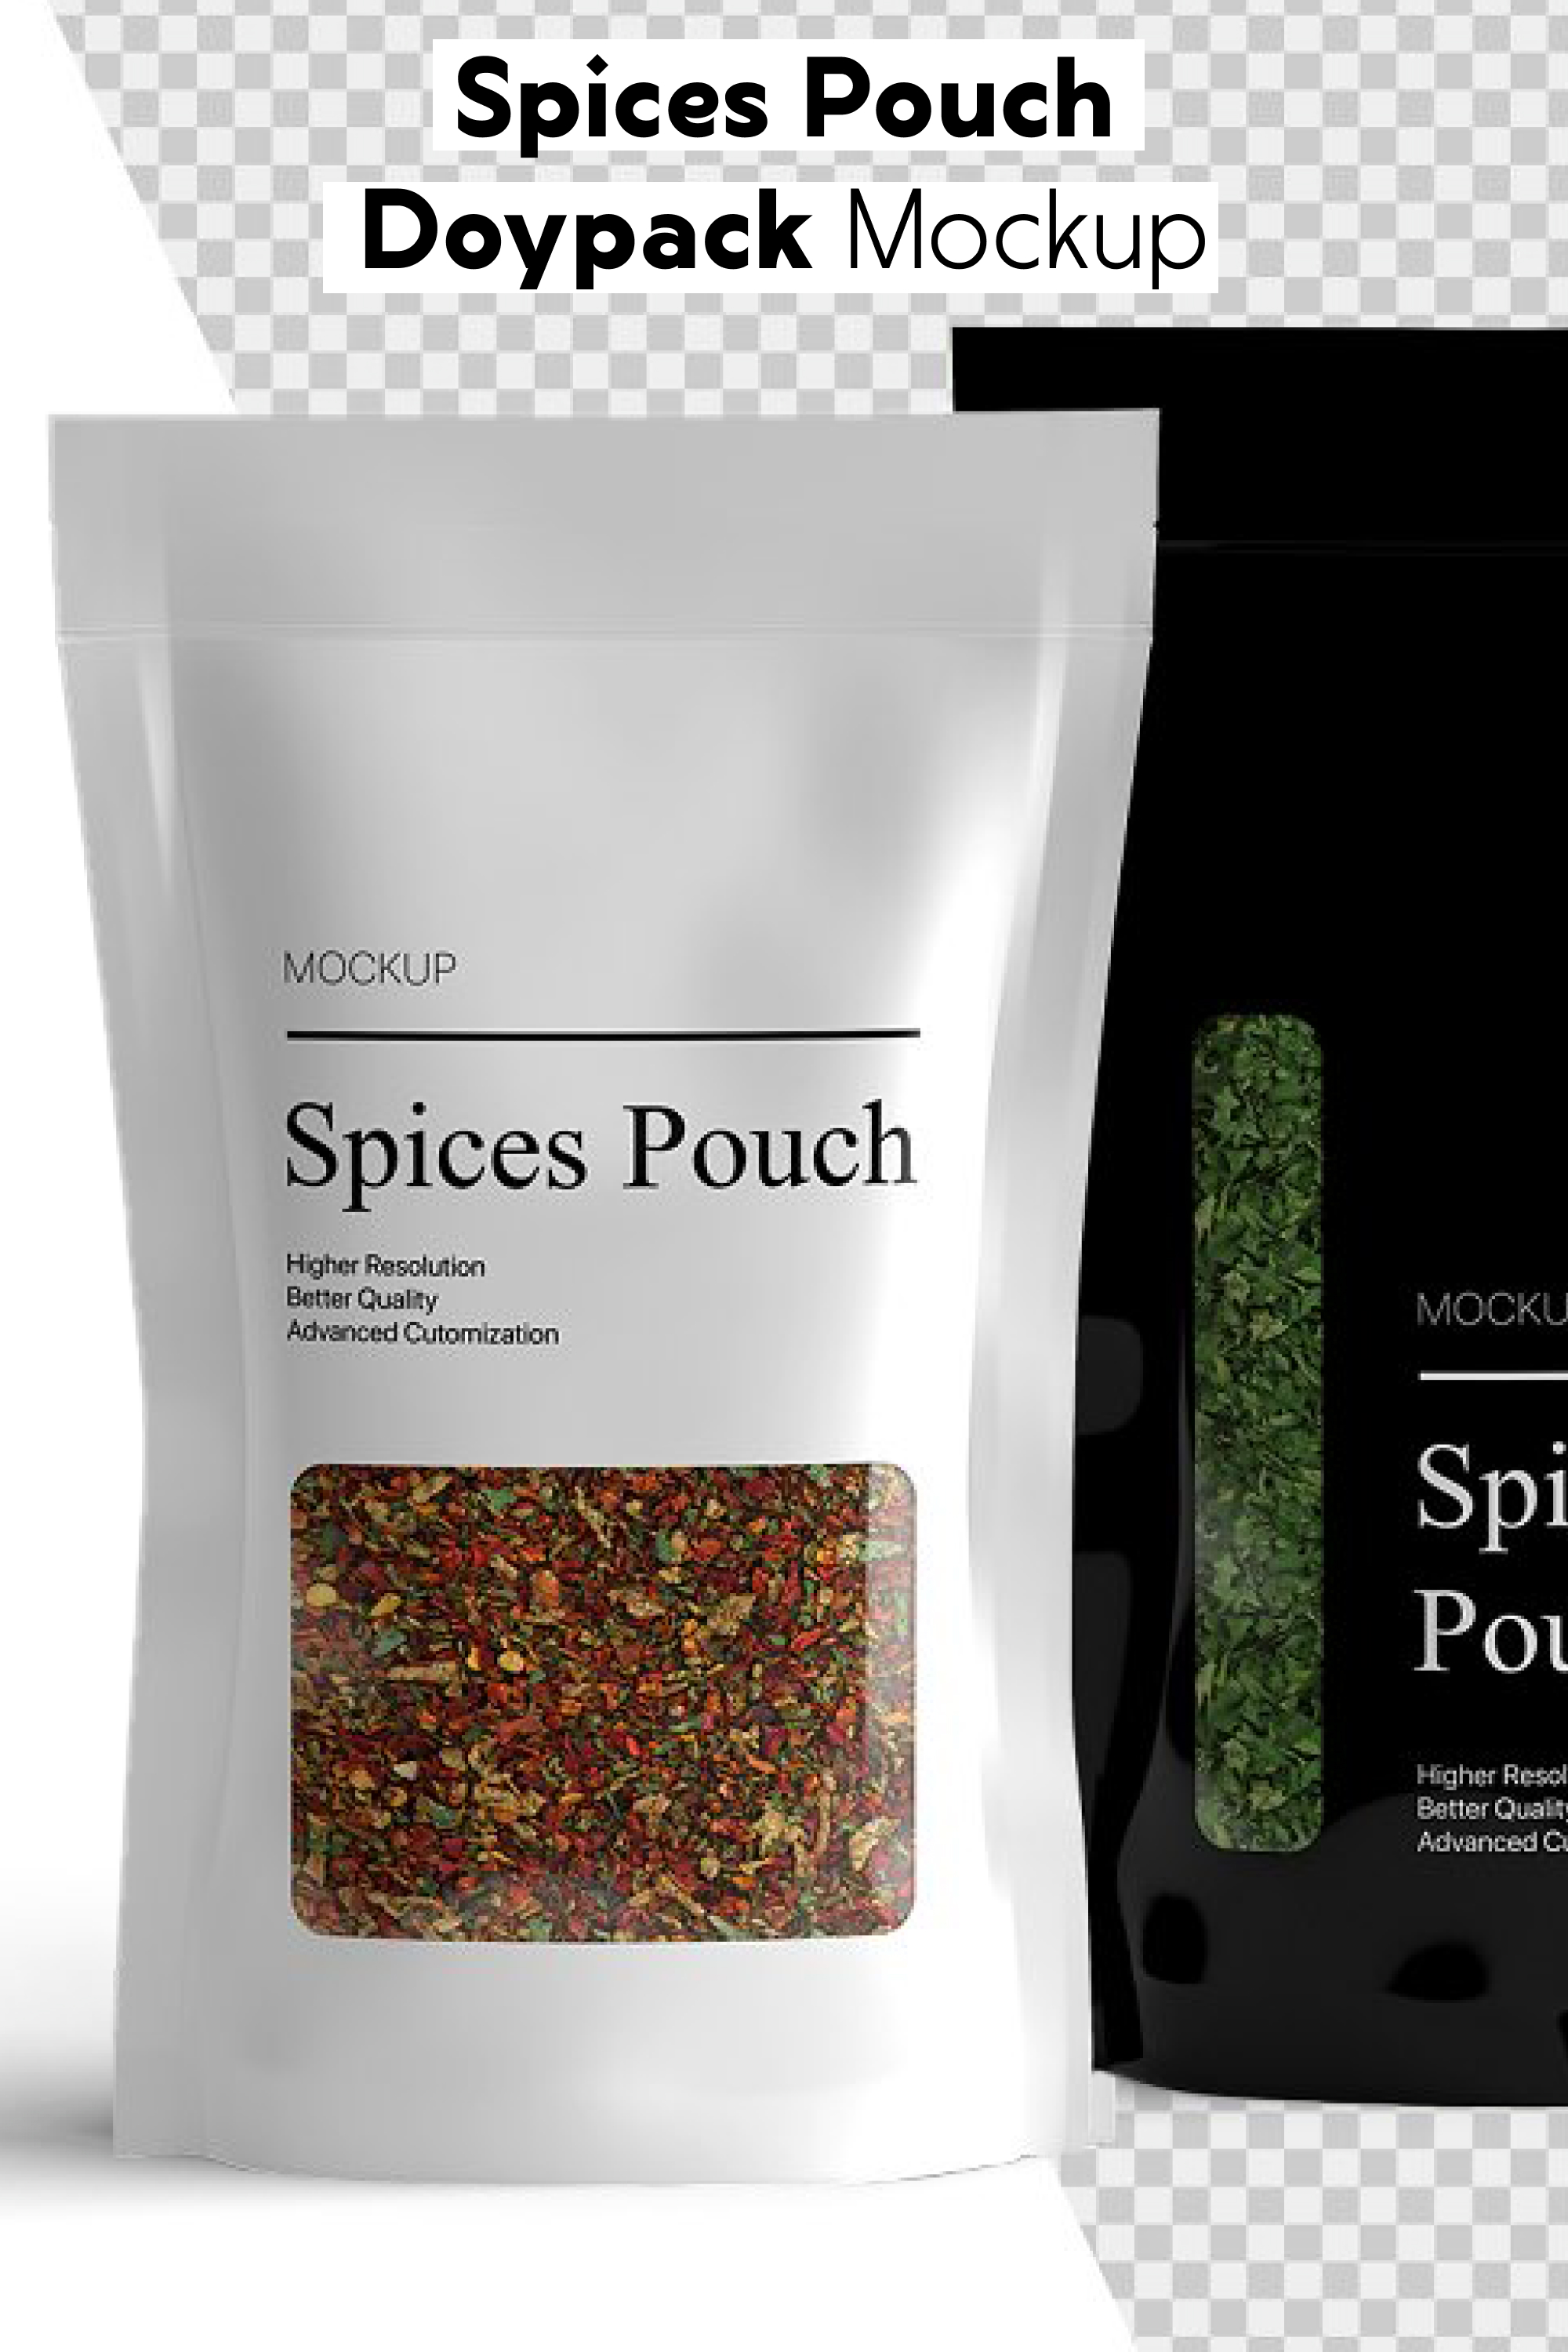 Spices pouch doypack mockup of pinterest.